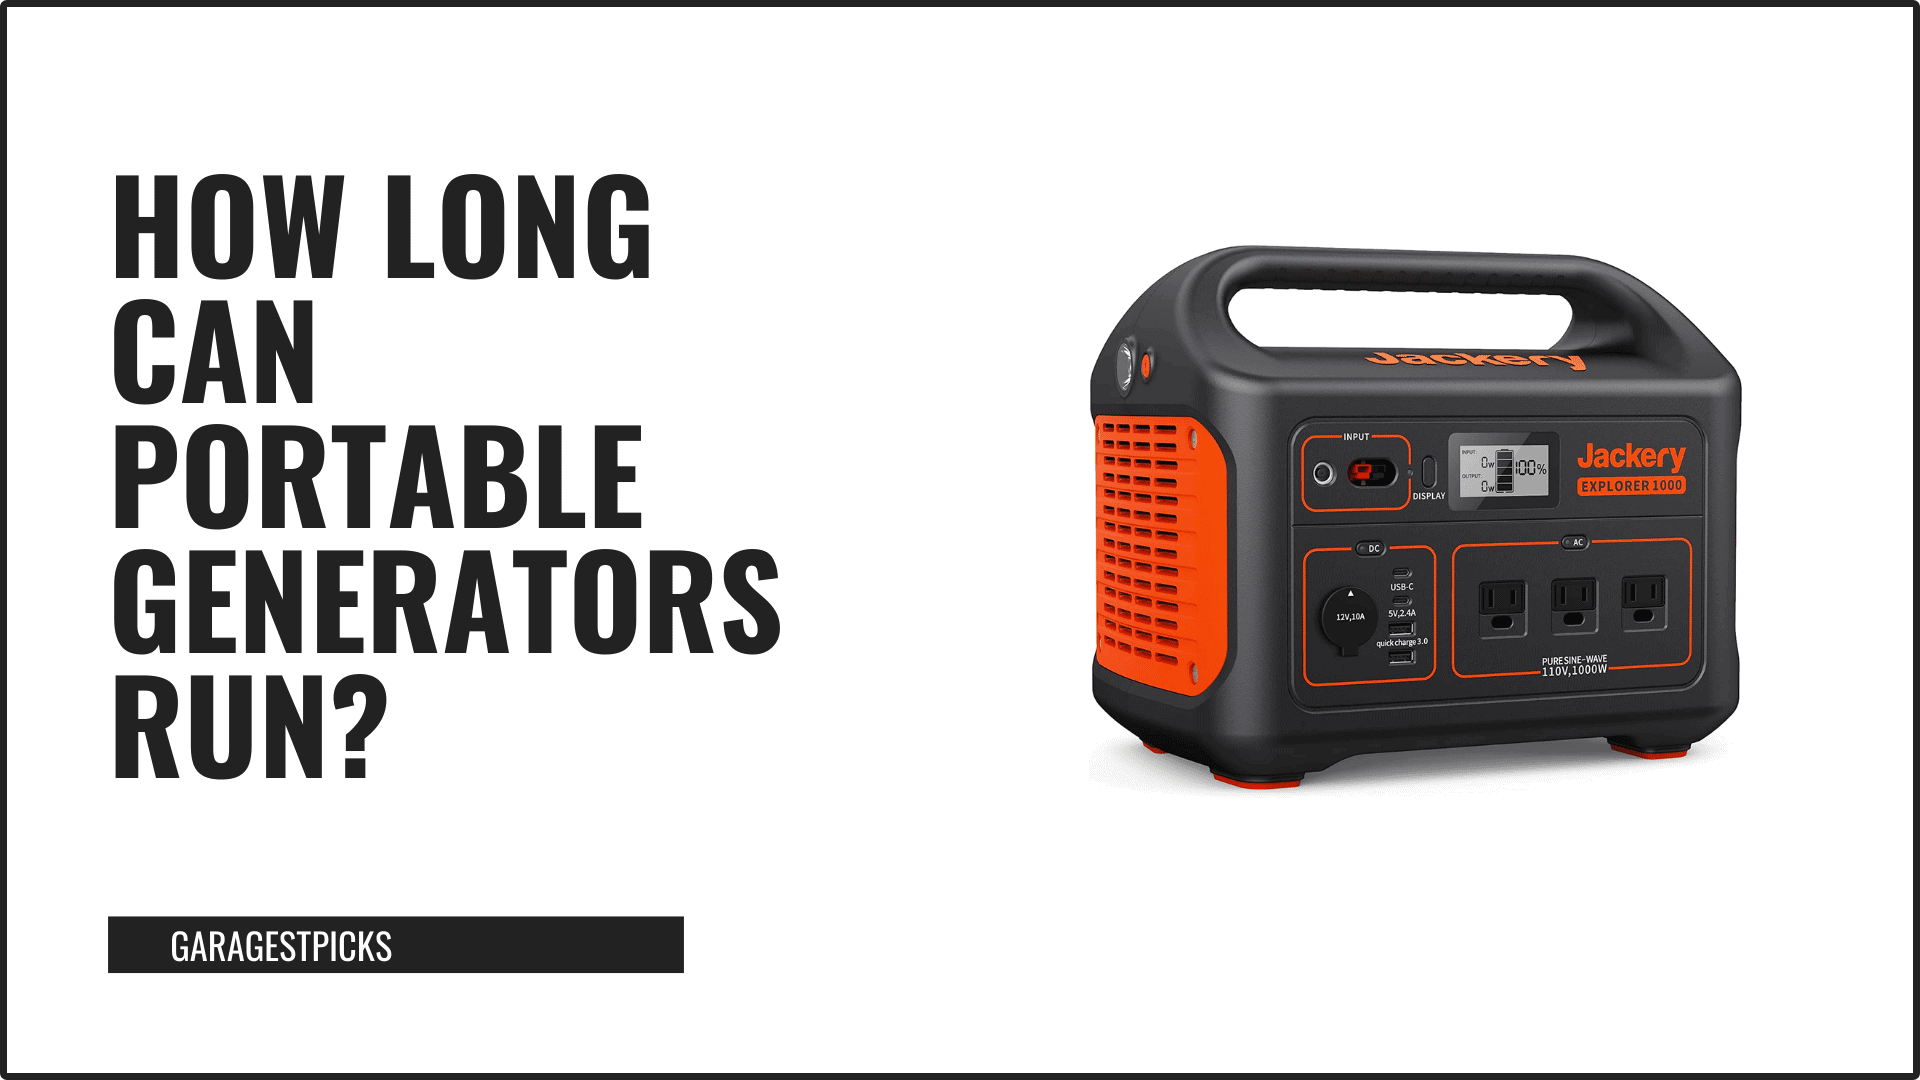 How long can portable generators run? in black text on white background with image of portable generator